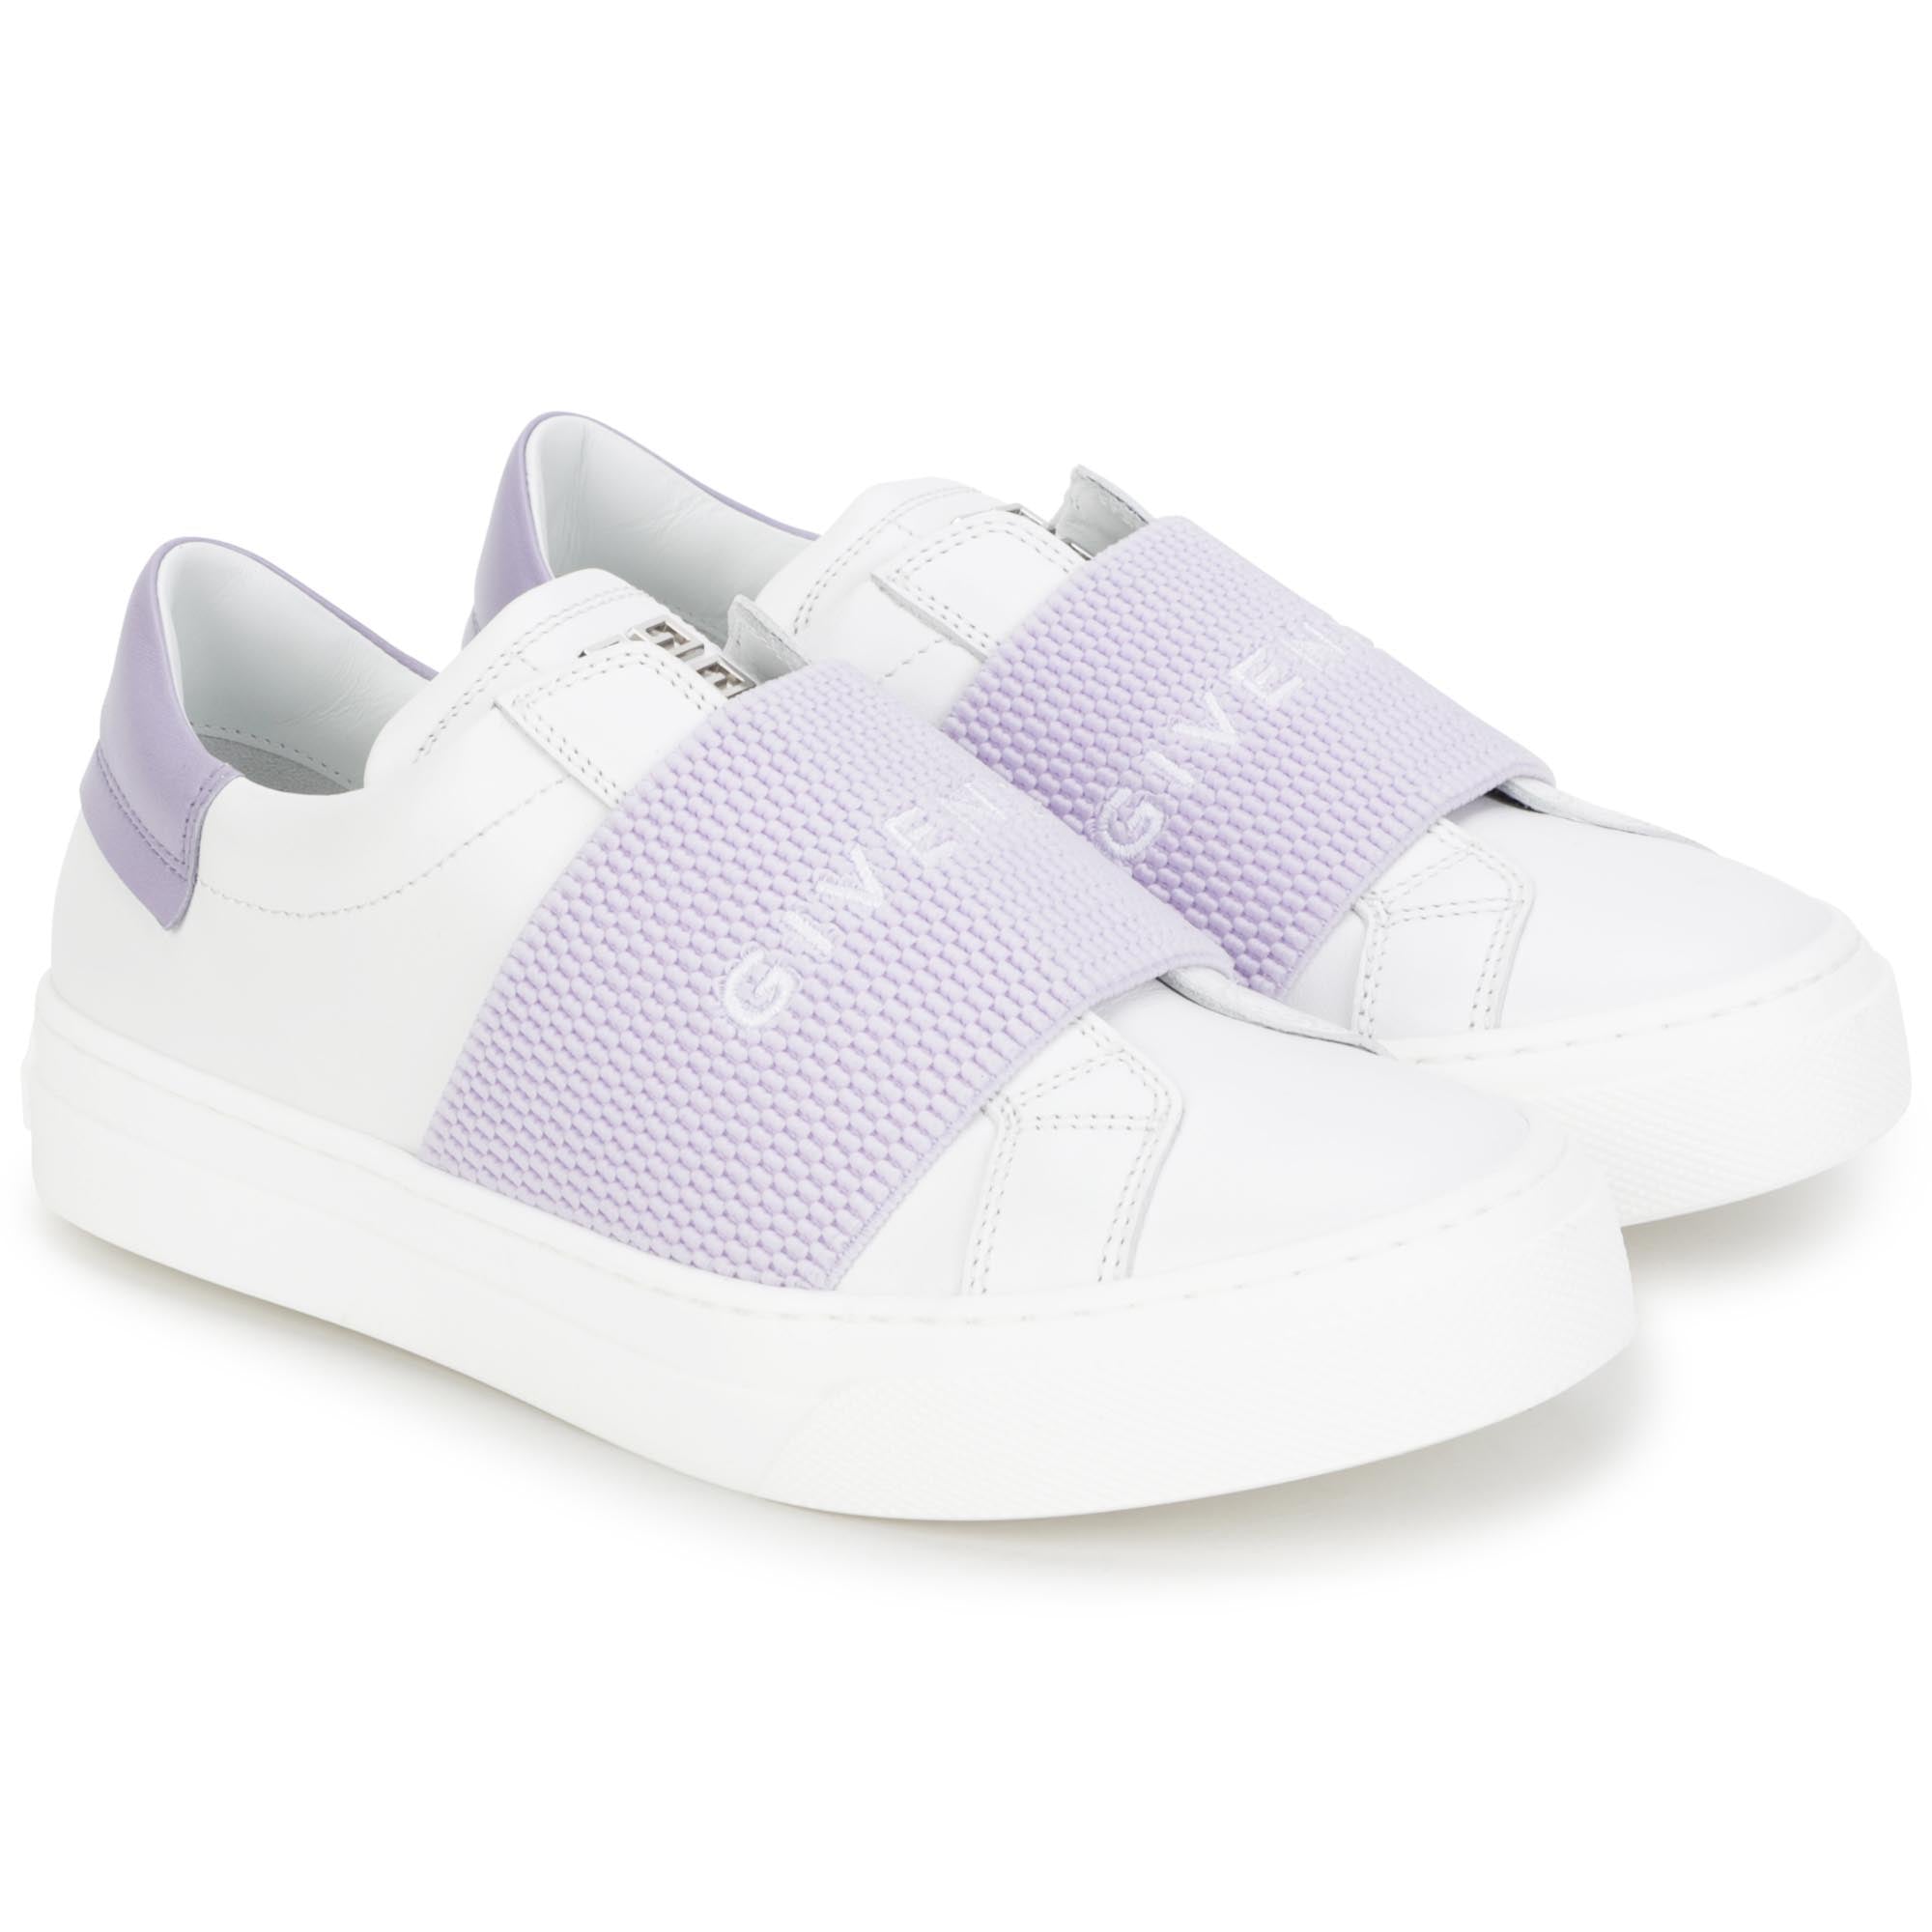 Givenchy White and Lavender Sneakers